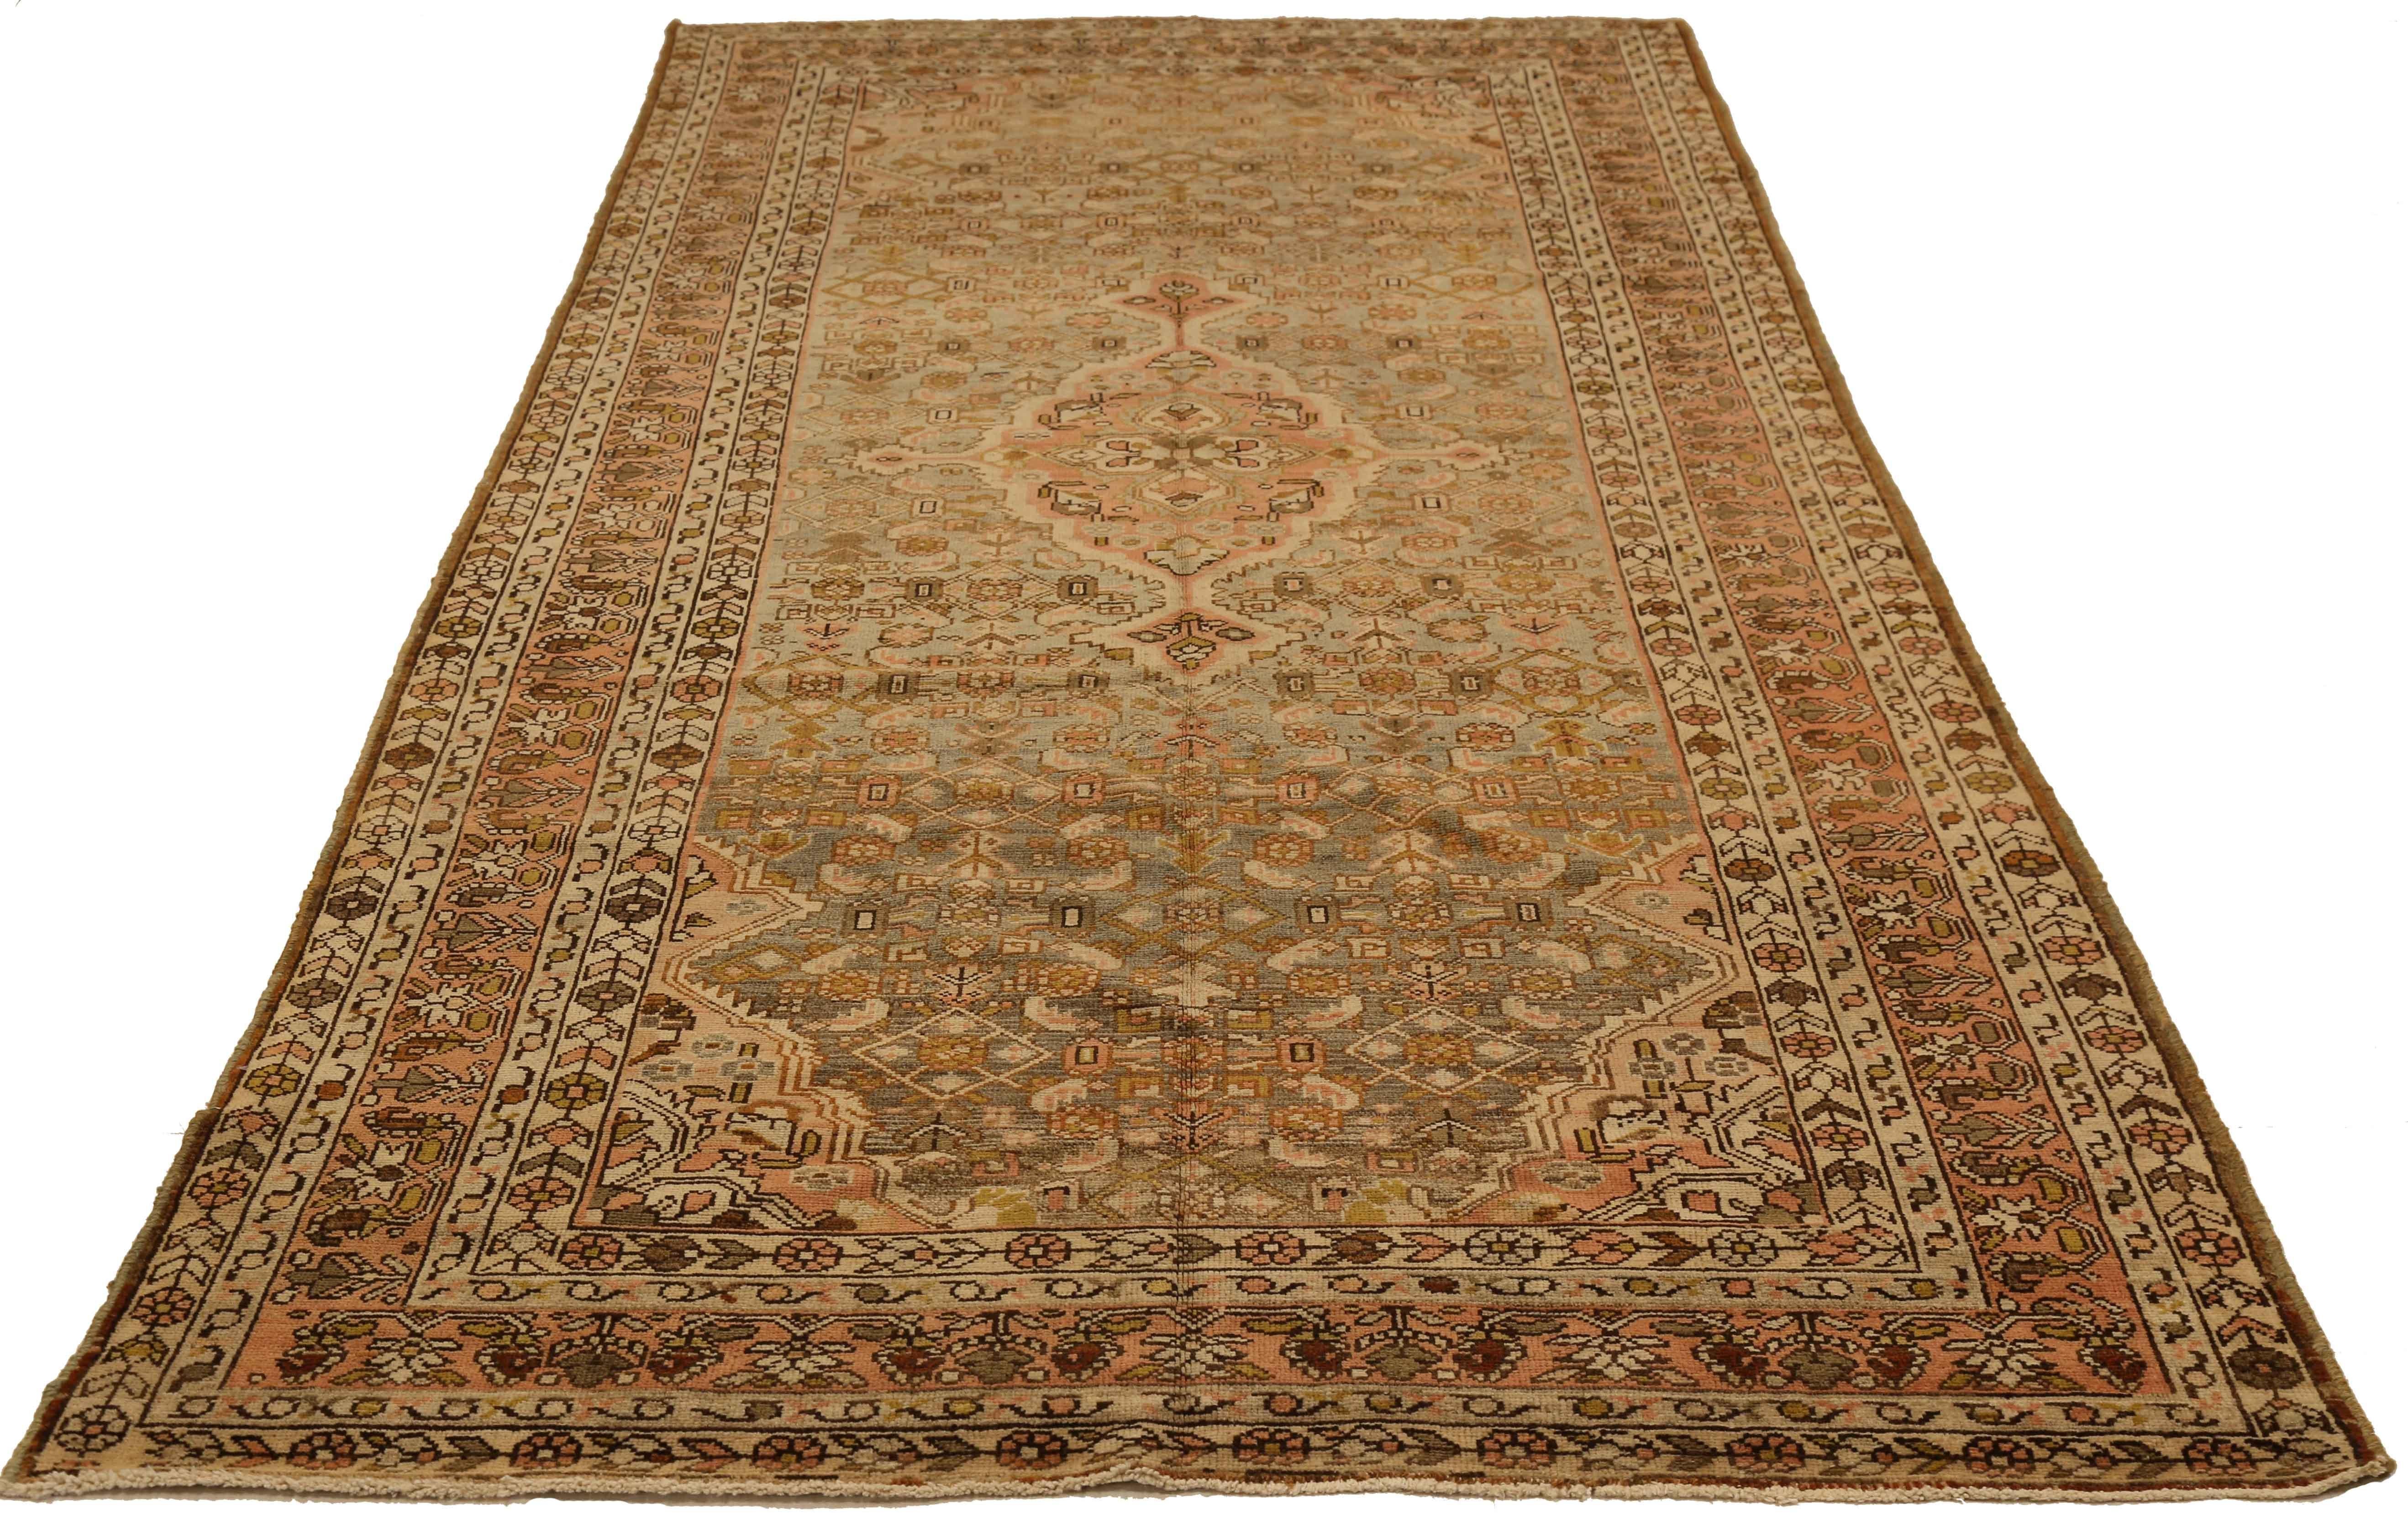 Antique Persian rug handwoven from the finest sheep’s wool. It's colored with all-natural vegetable dyes that are safe for humans and pets. It’s a traditional Malayer design featuring a mix of pink, and brown floral details over an ivory field. It’s